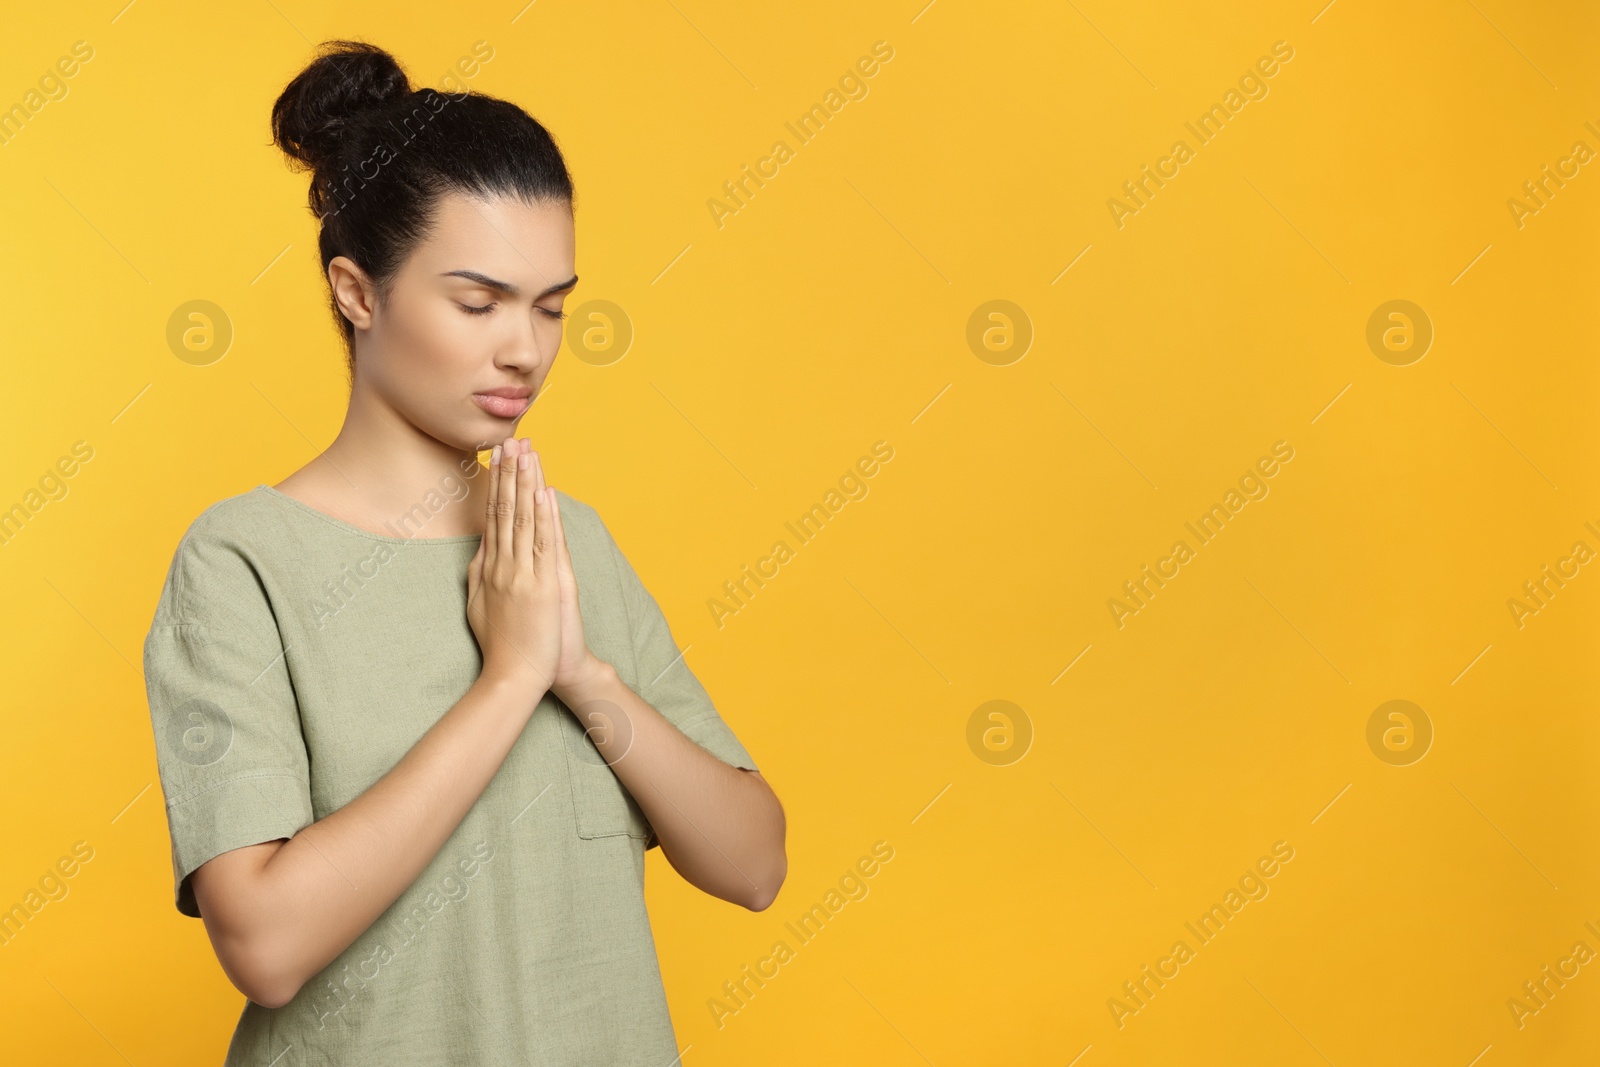 Photo of African American woman with clasped hands praying to God on orange background. Space for text